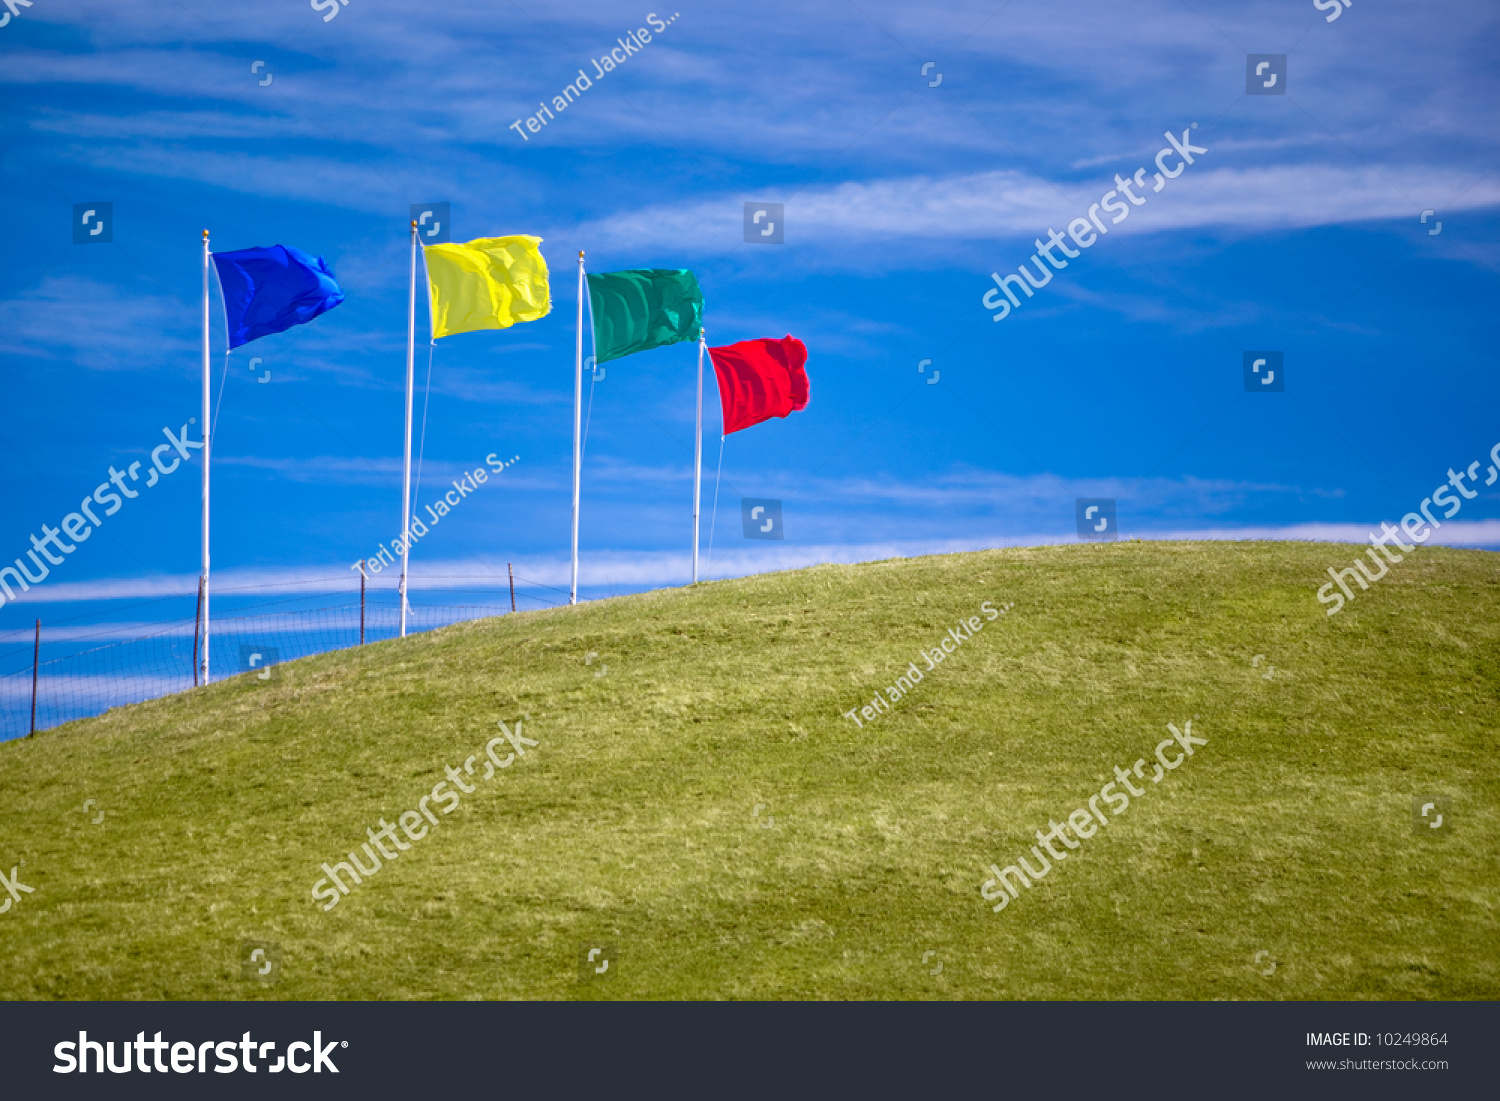 Four colorful flags on green grassy hill invite shoppers to attend an open house or other sales event.  Ample room for copy. #10249864